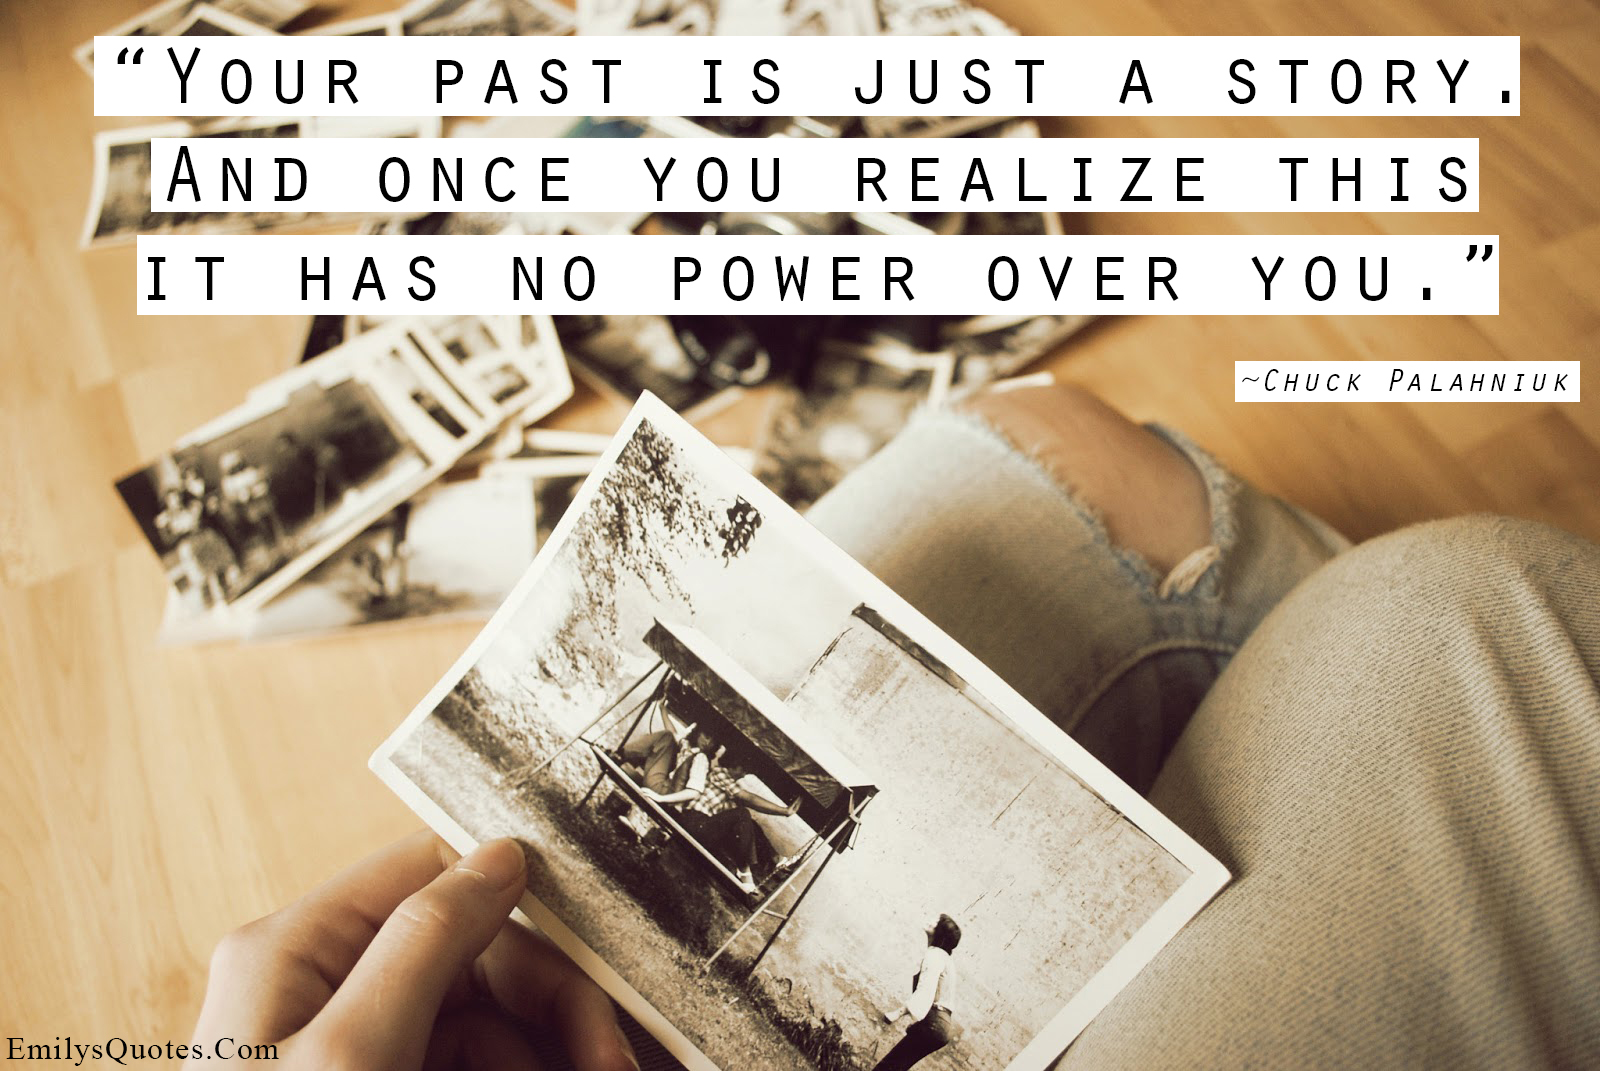 Your past is just a story. And once you realize this it has no power over you